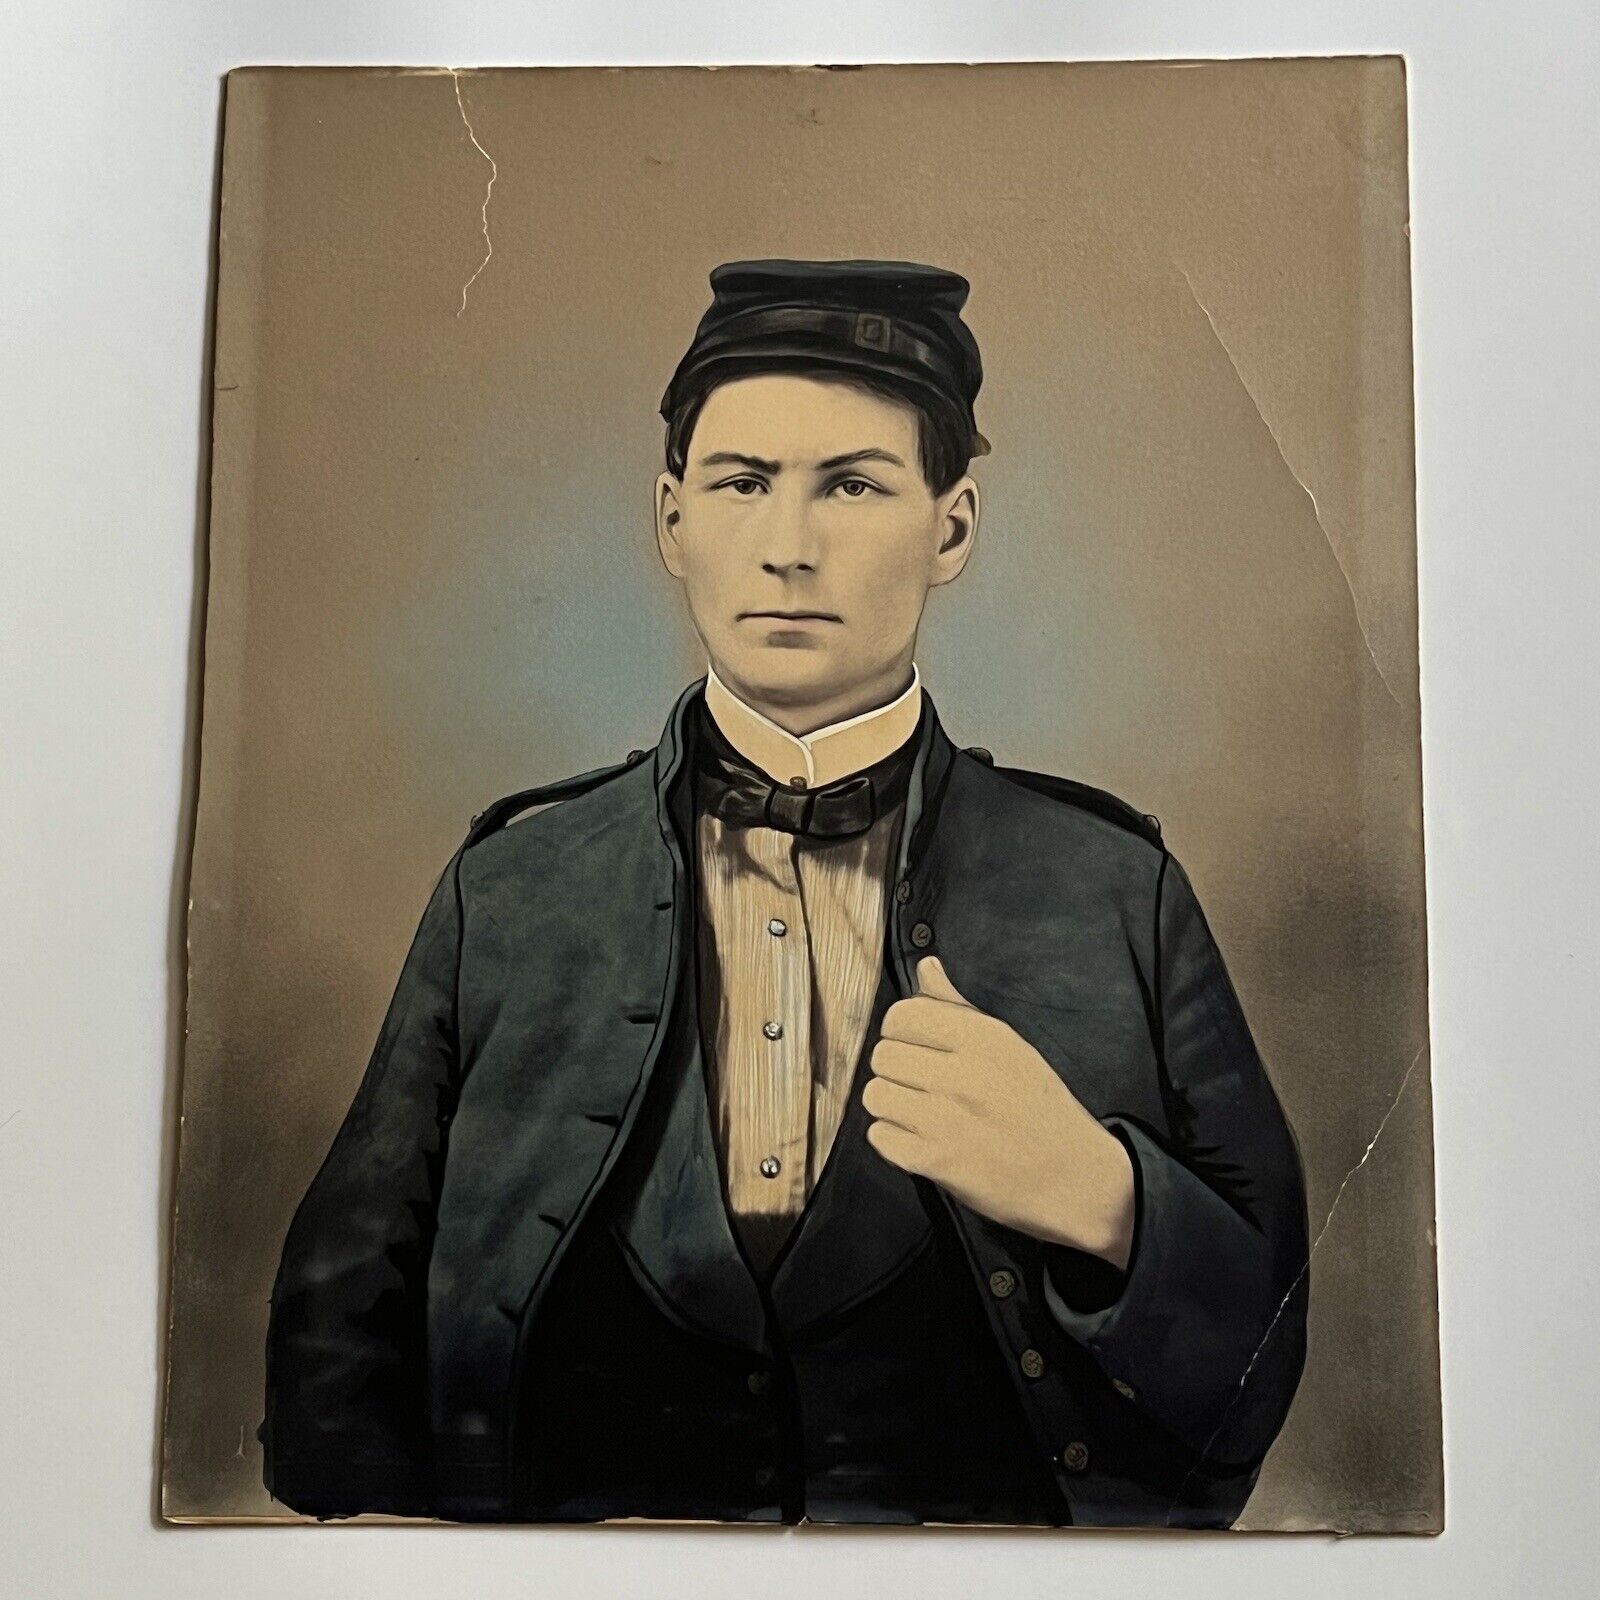 Antique Cabinet Card Photograph Man Union Soldier Folk Art Colored Tinted